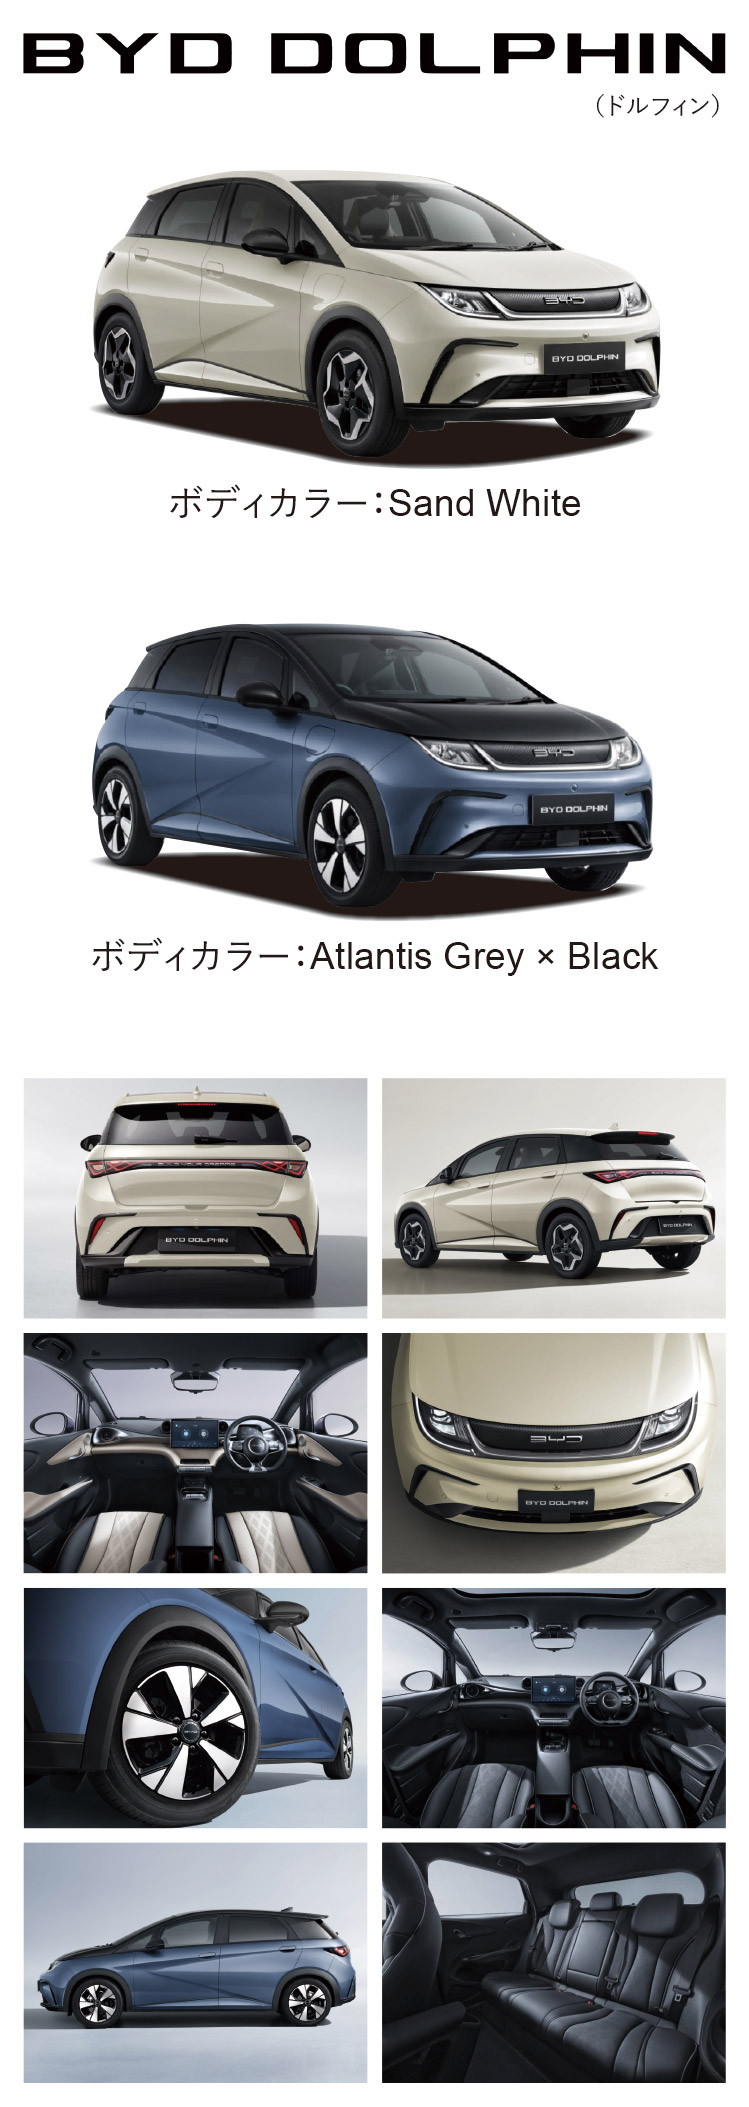 BYD,DOLPHIN,ドルフィン,コンパクト,EV